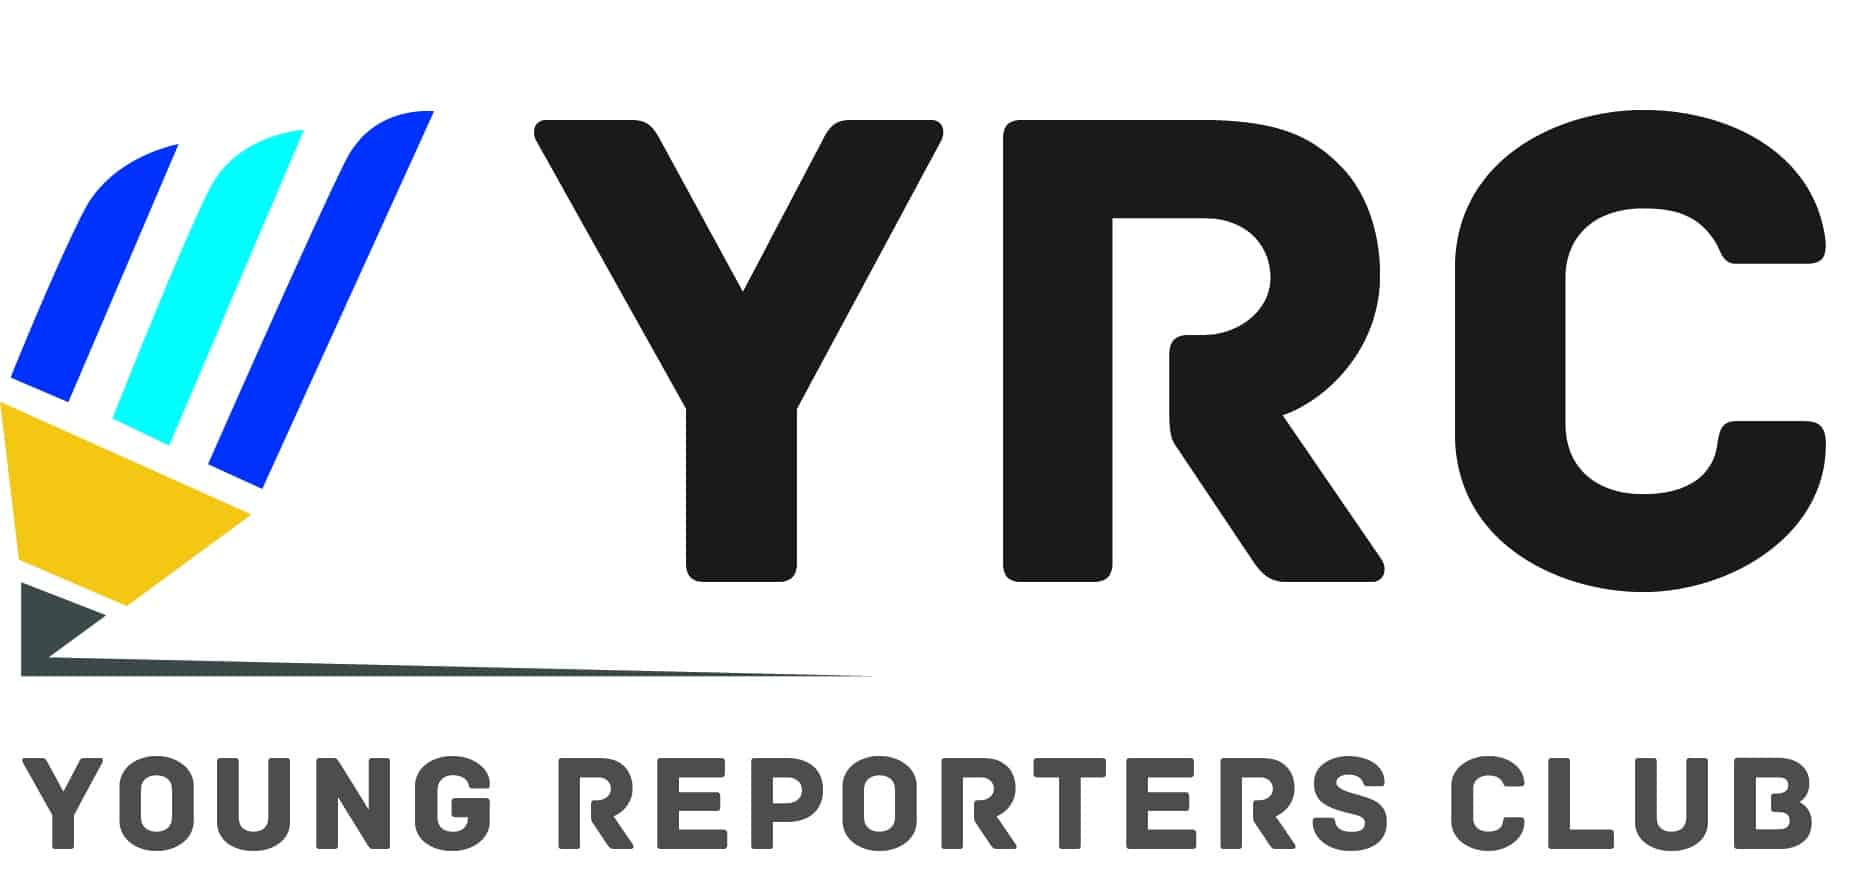 Young Reporters Club